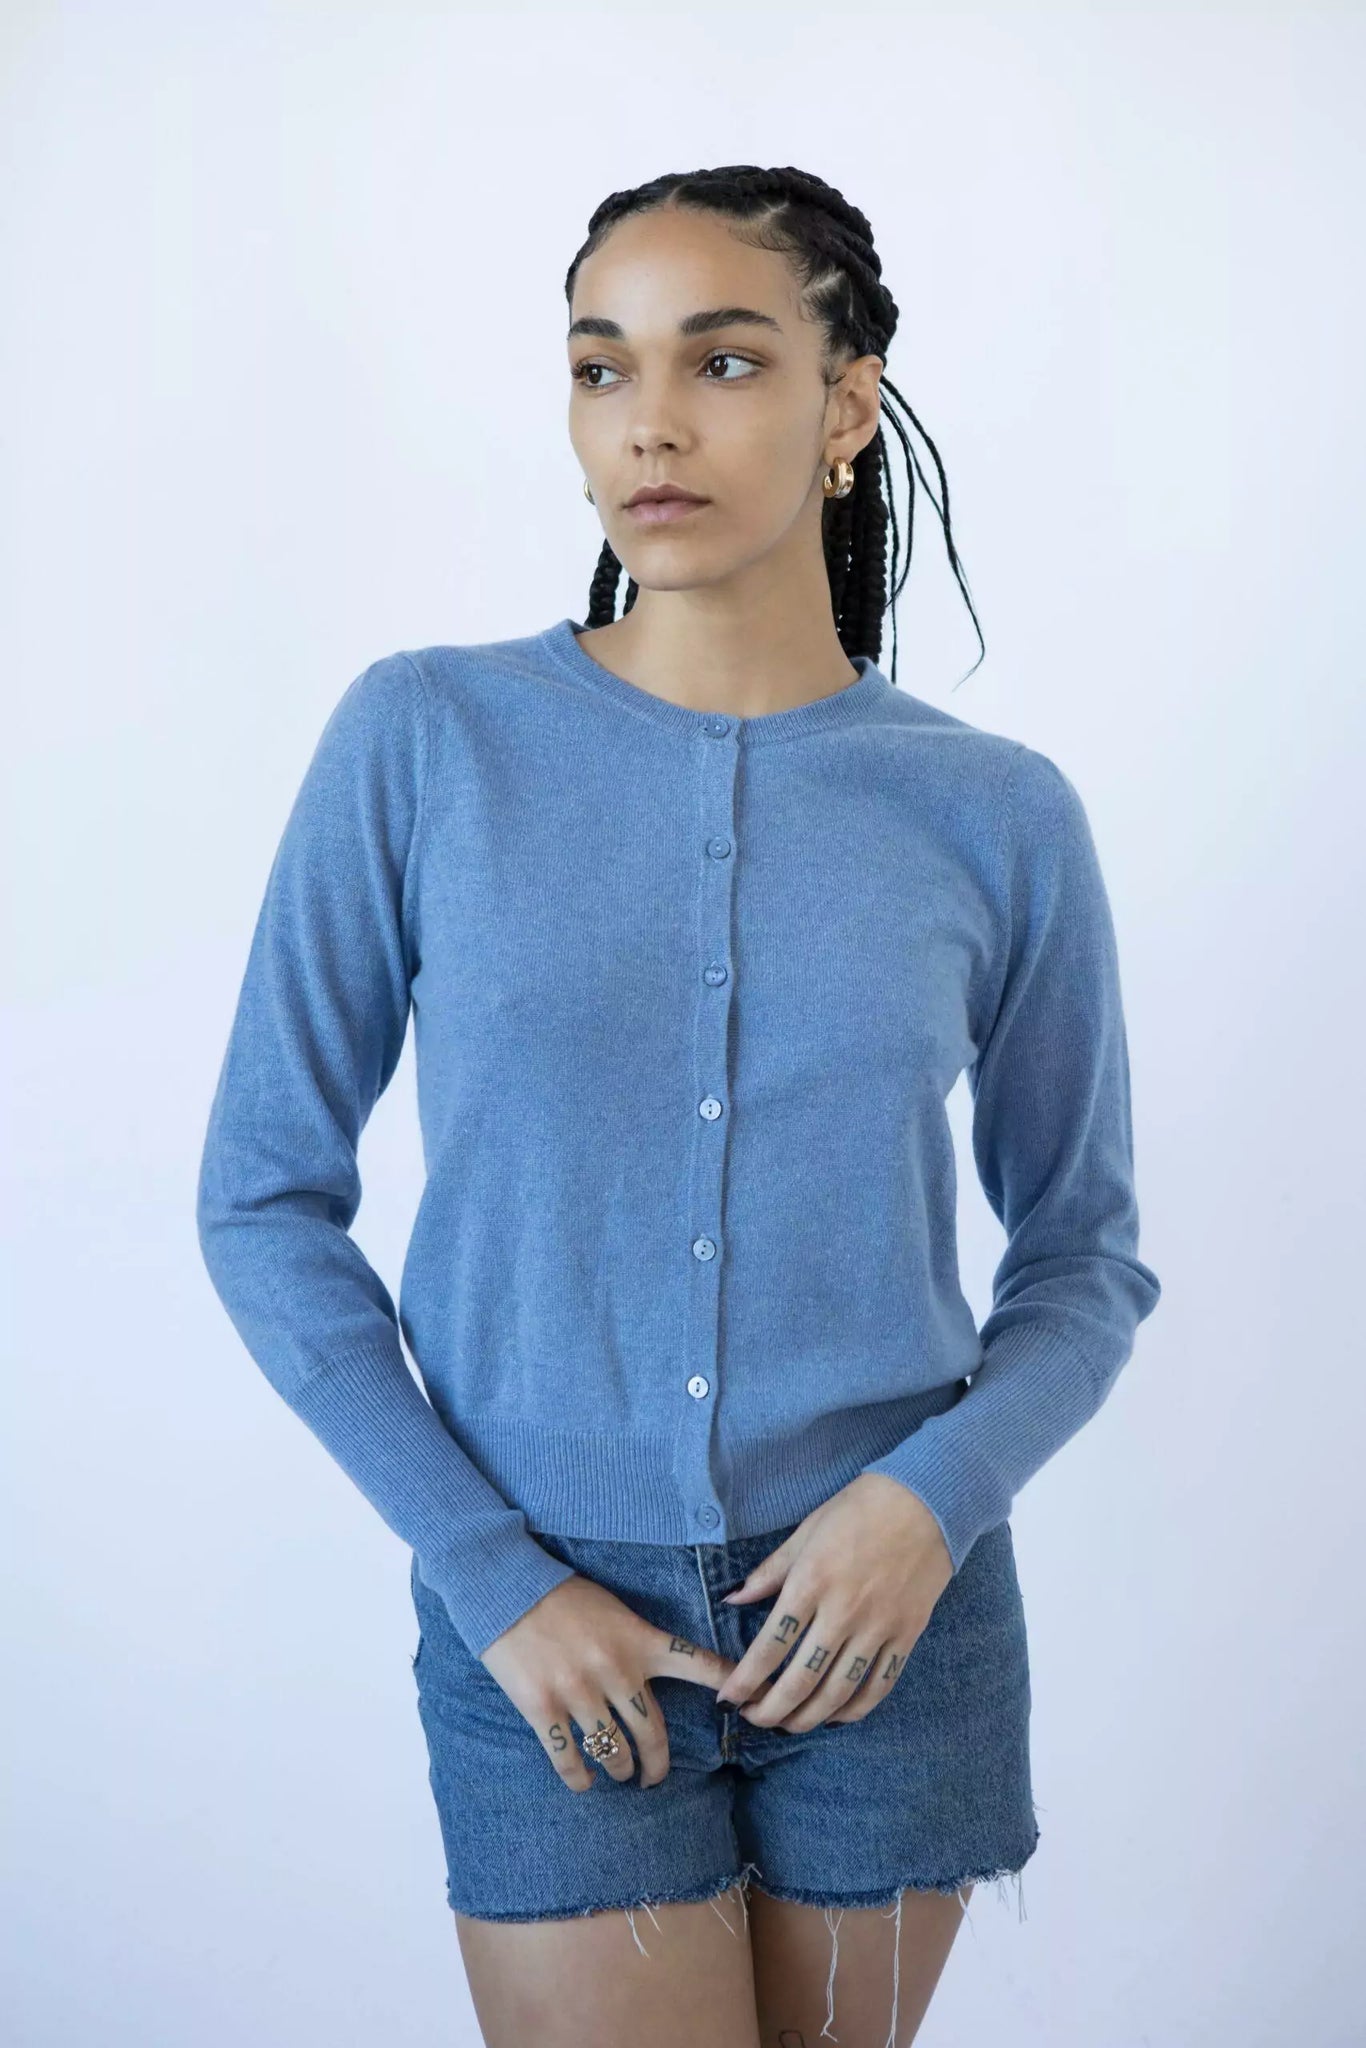 Photo of Model wearing Lyla Cashmere Cardigan featuring buttons up the front in the colour billy jean (blue) available at UniKoncept in Waterloo